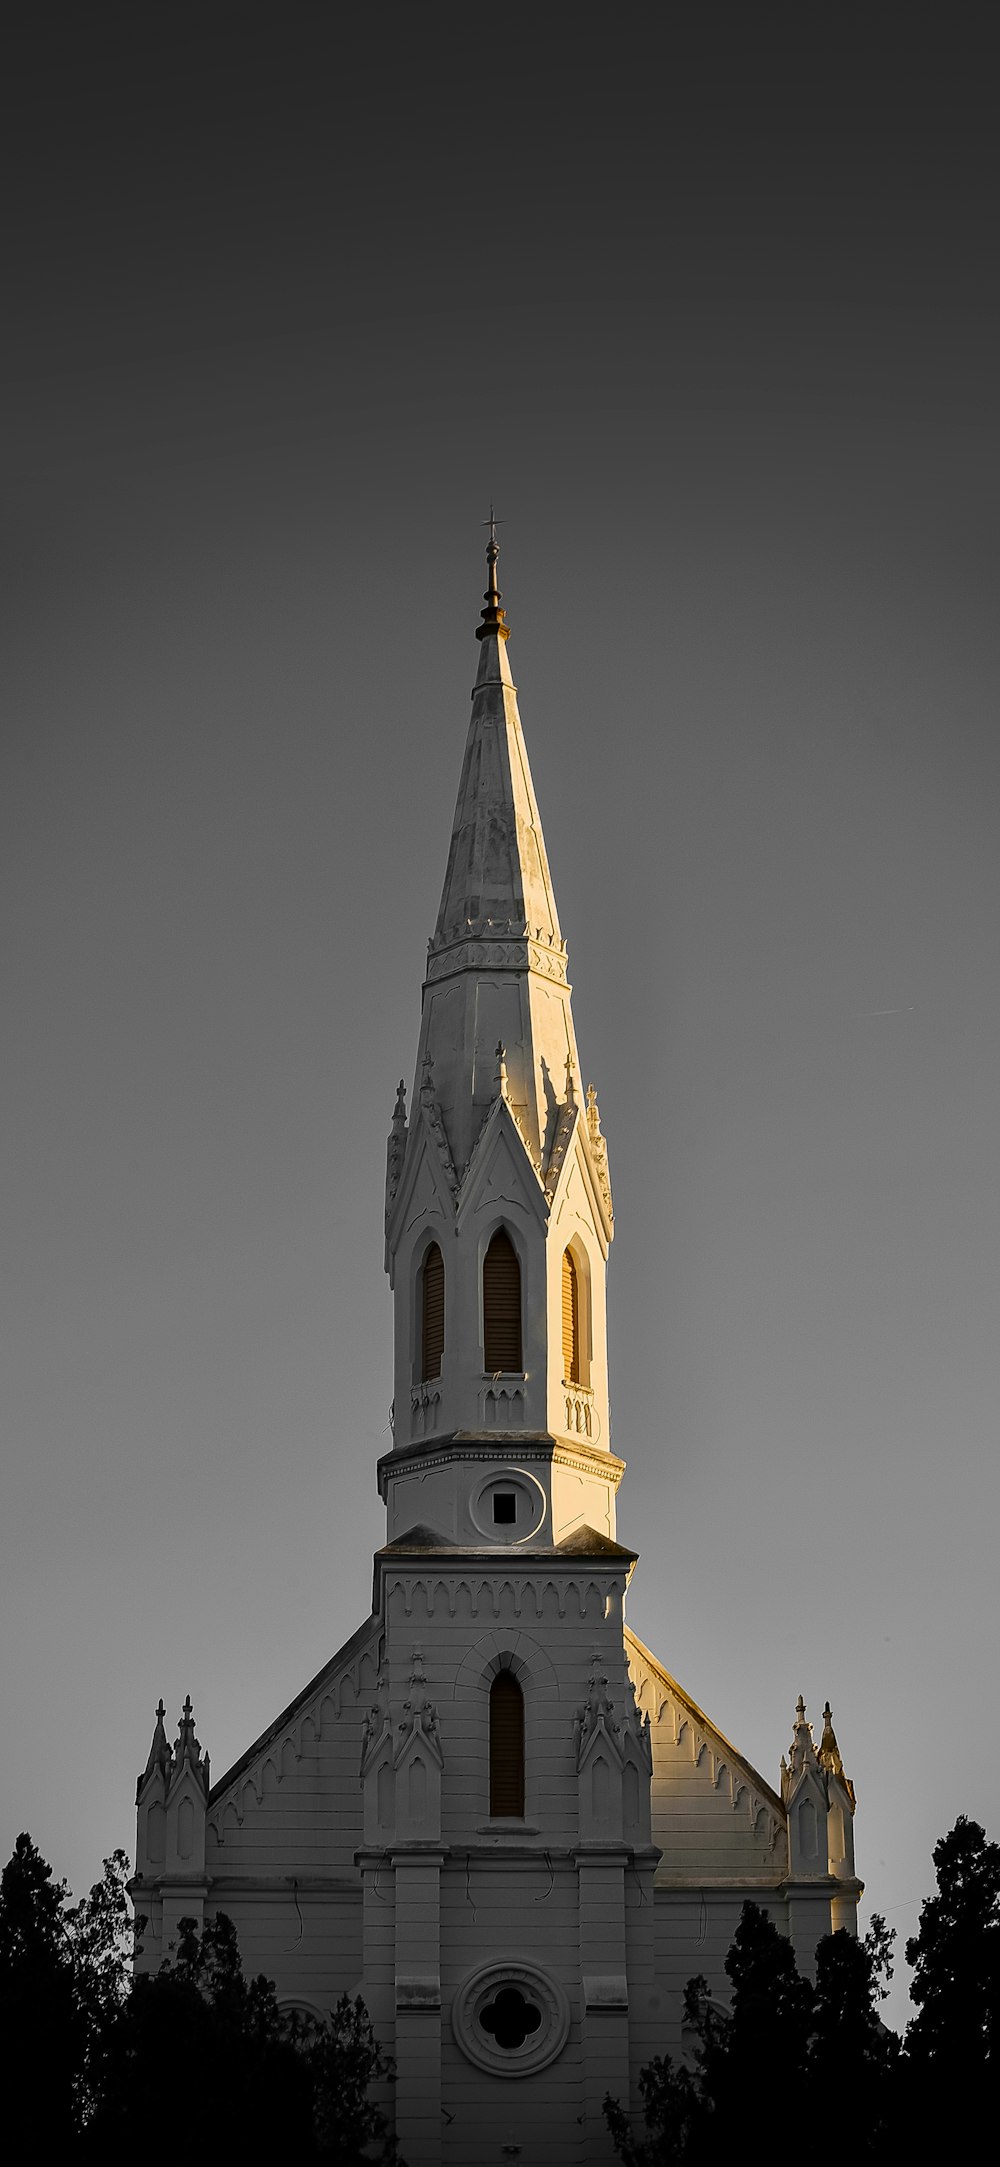 a church with a steeple and a clock on it